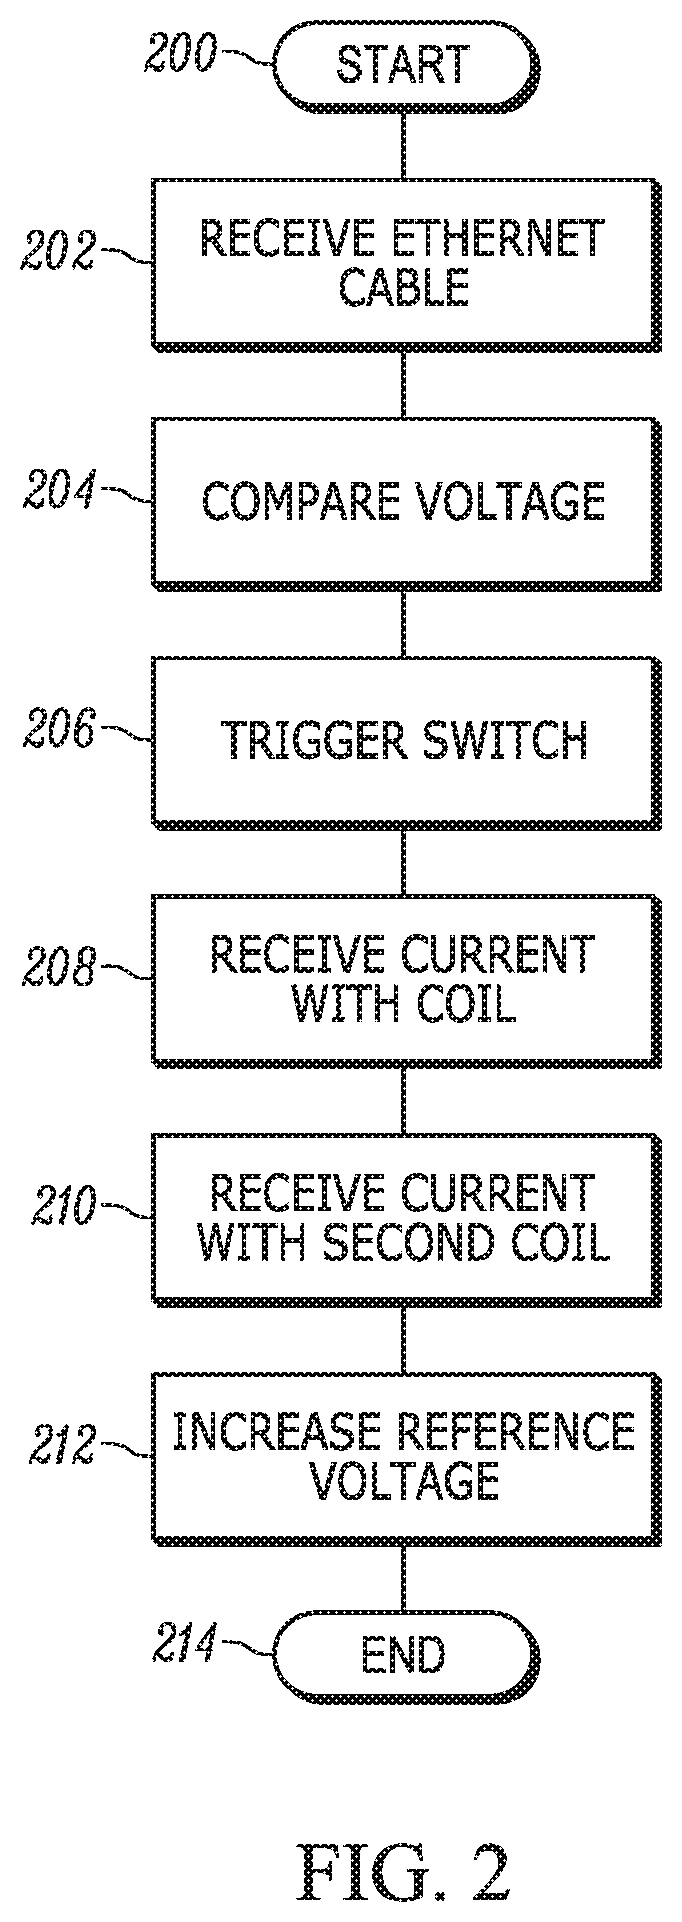 Ethernet power distribution systems, controllers, and methods